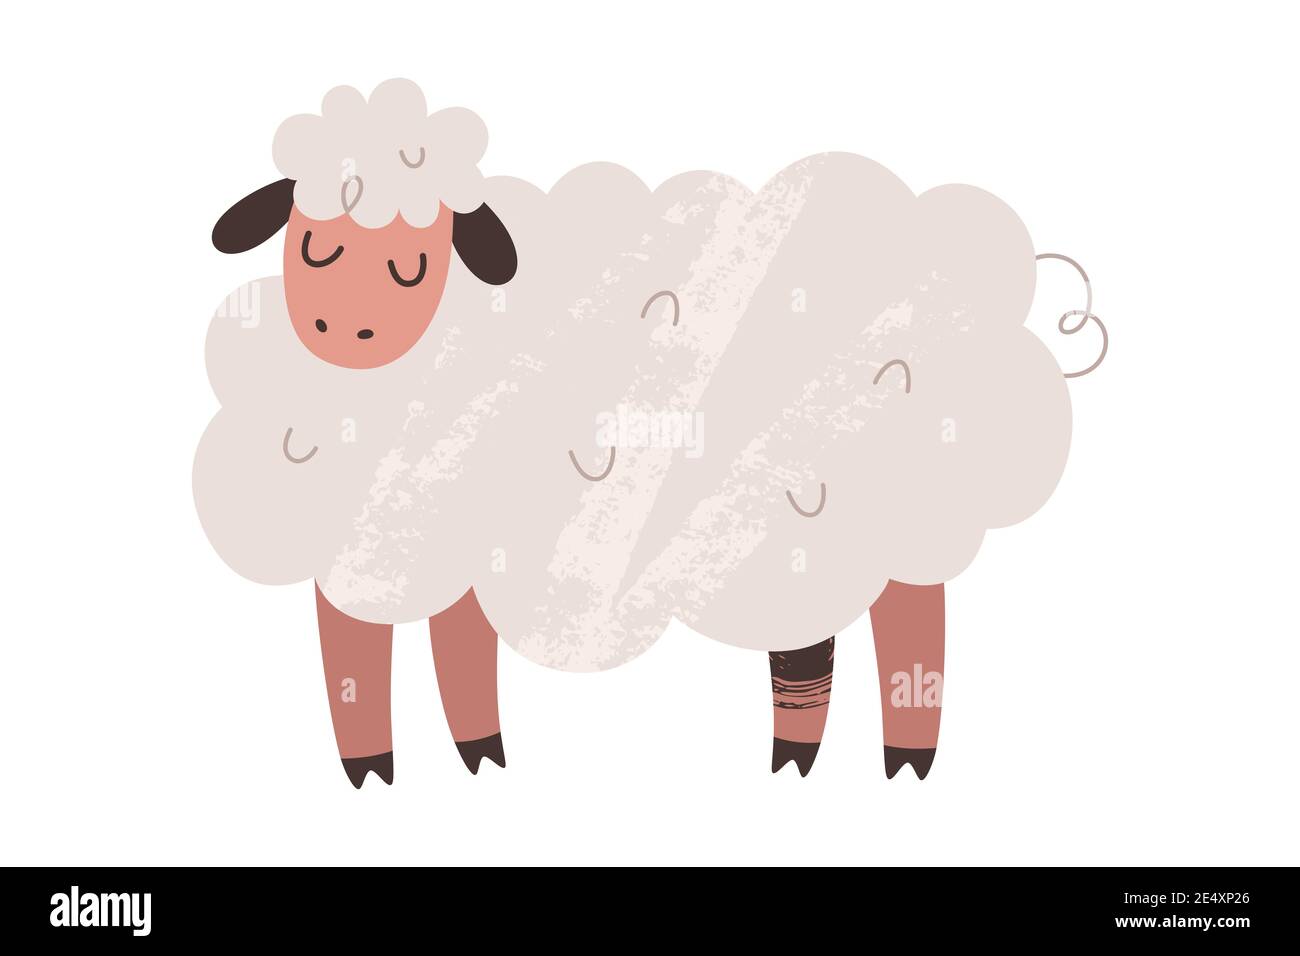 Cute cute fluffy sheep with face expression, farm animal illustration, vector art isolated Stock Vector